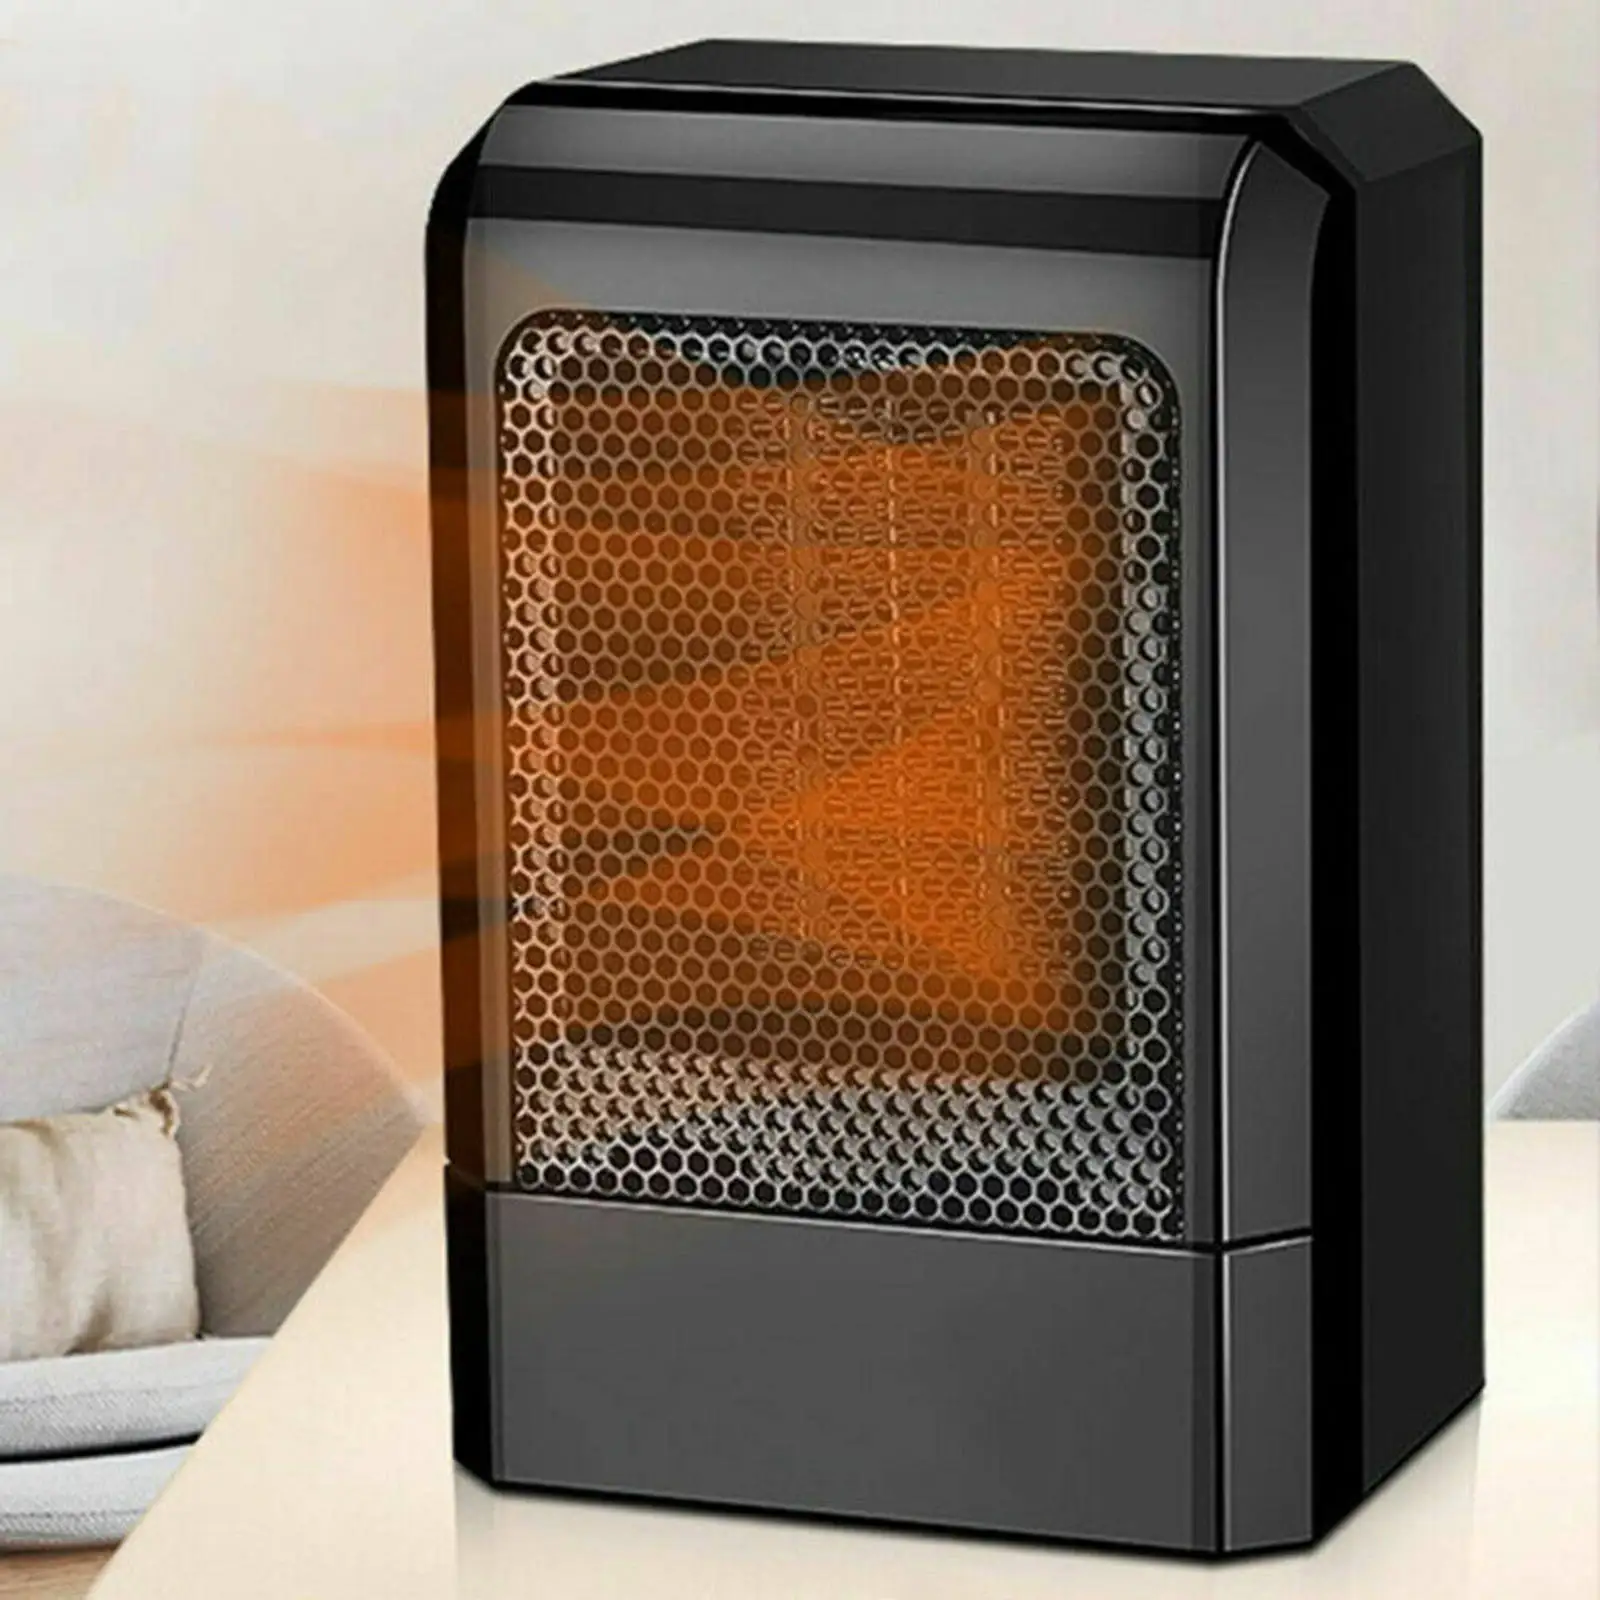 500W Mini Ceramic Electric Heater Home Office Space Heating Portable Fan Silent Winter Warm Keeping Equipment